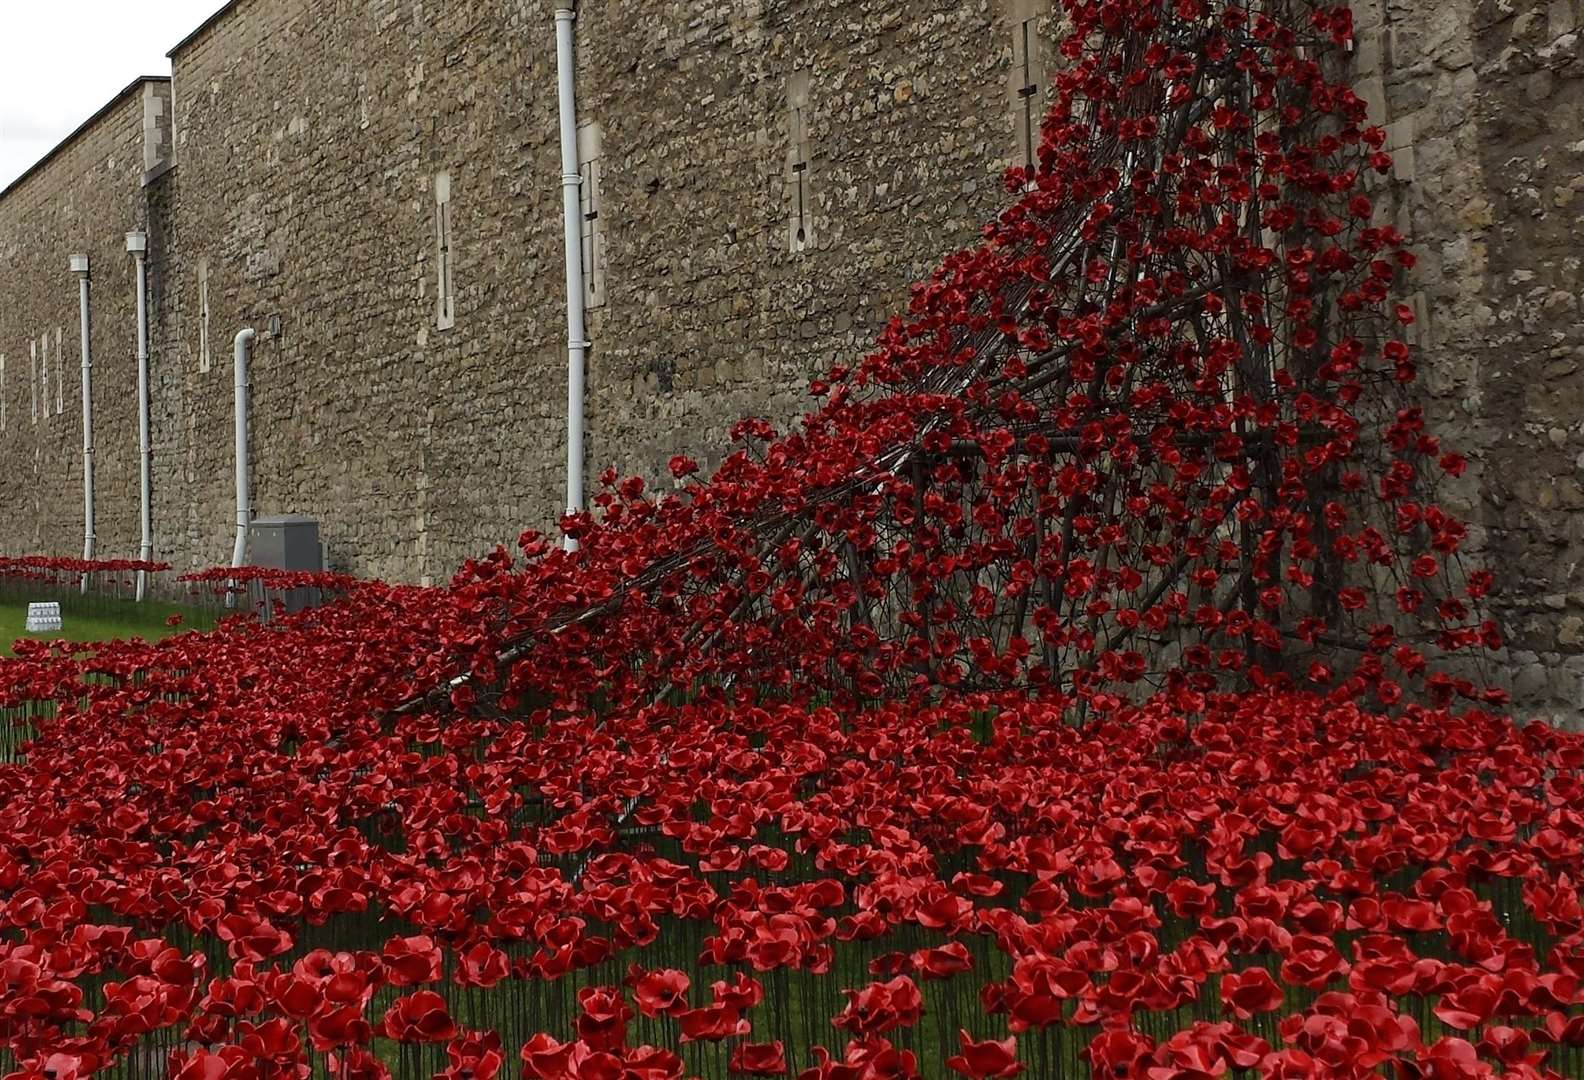 The Tower of London poppies which raised more than £1m for Haig Housing (4740311)